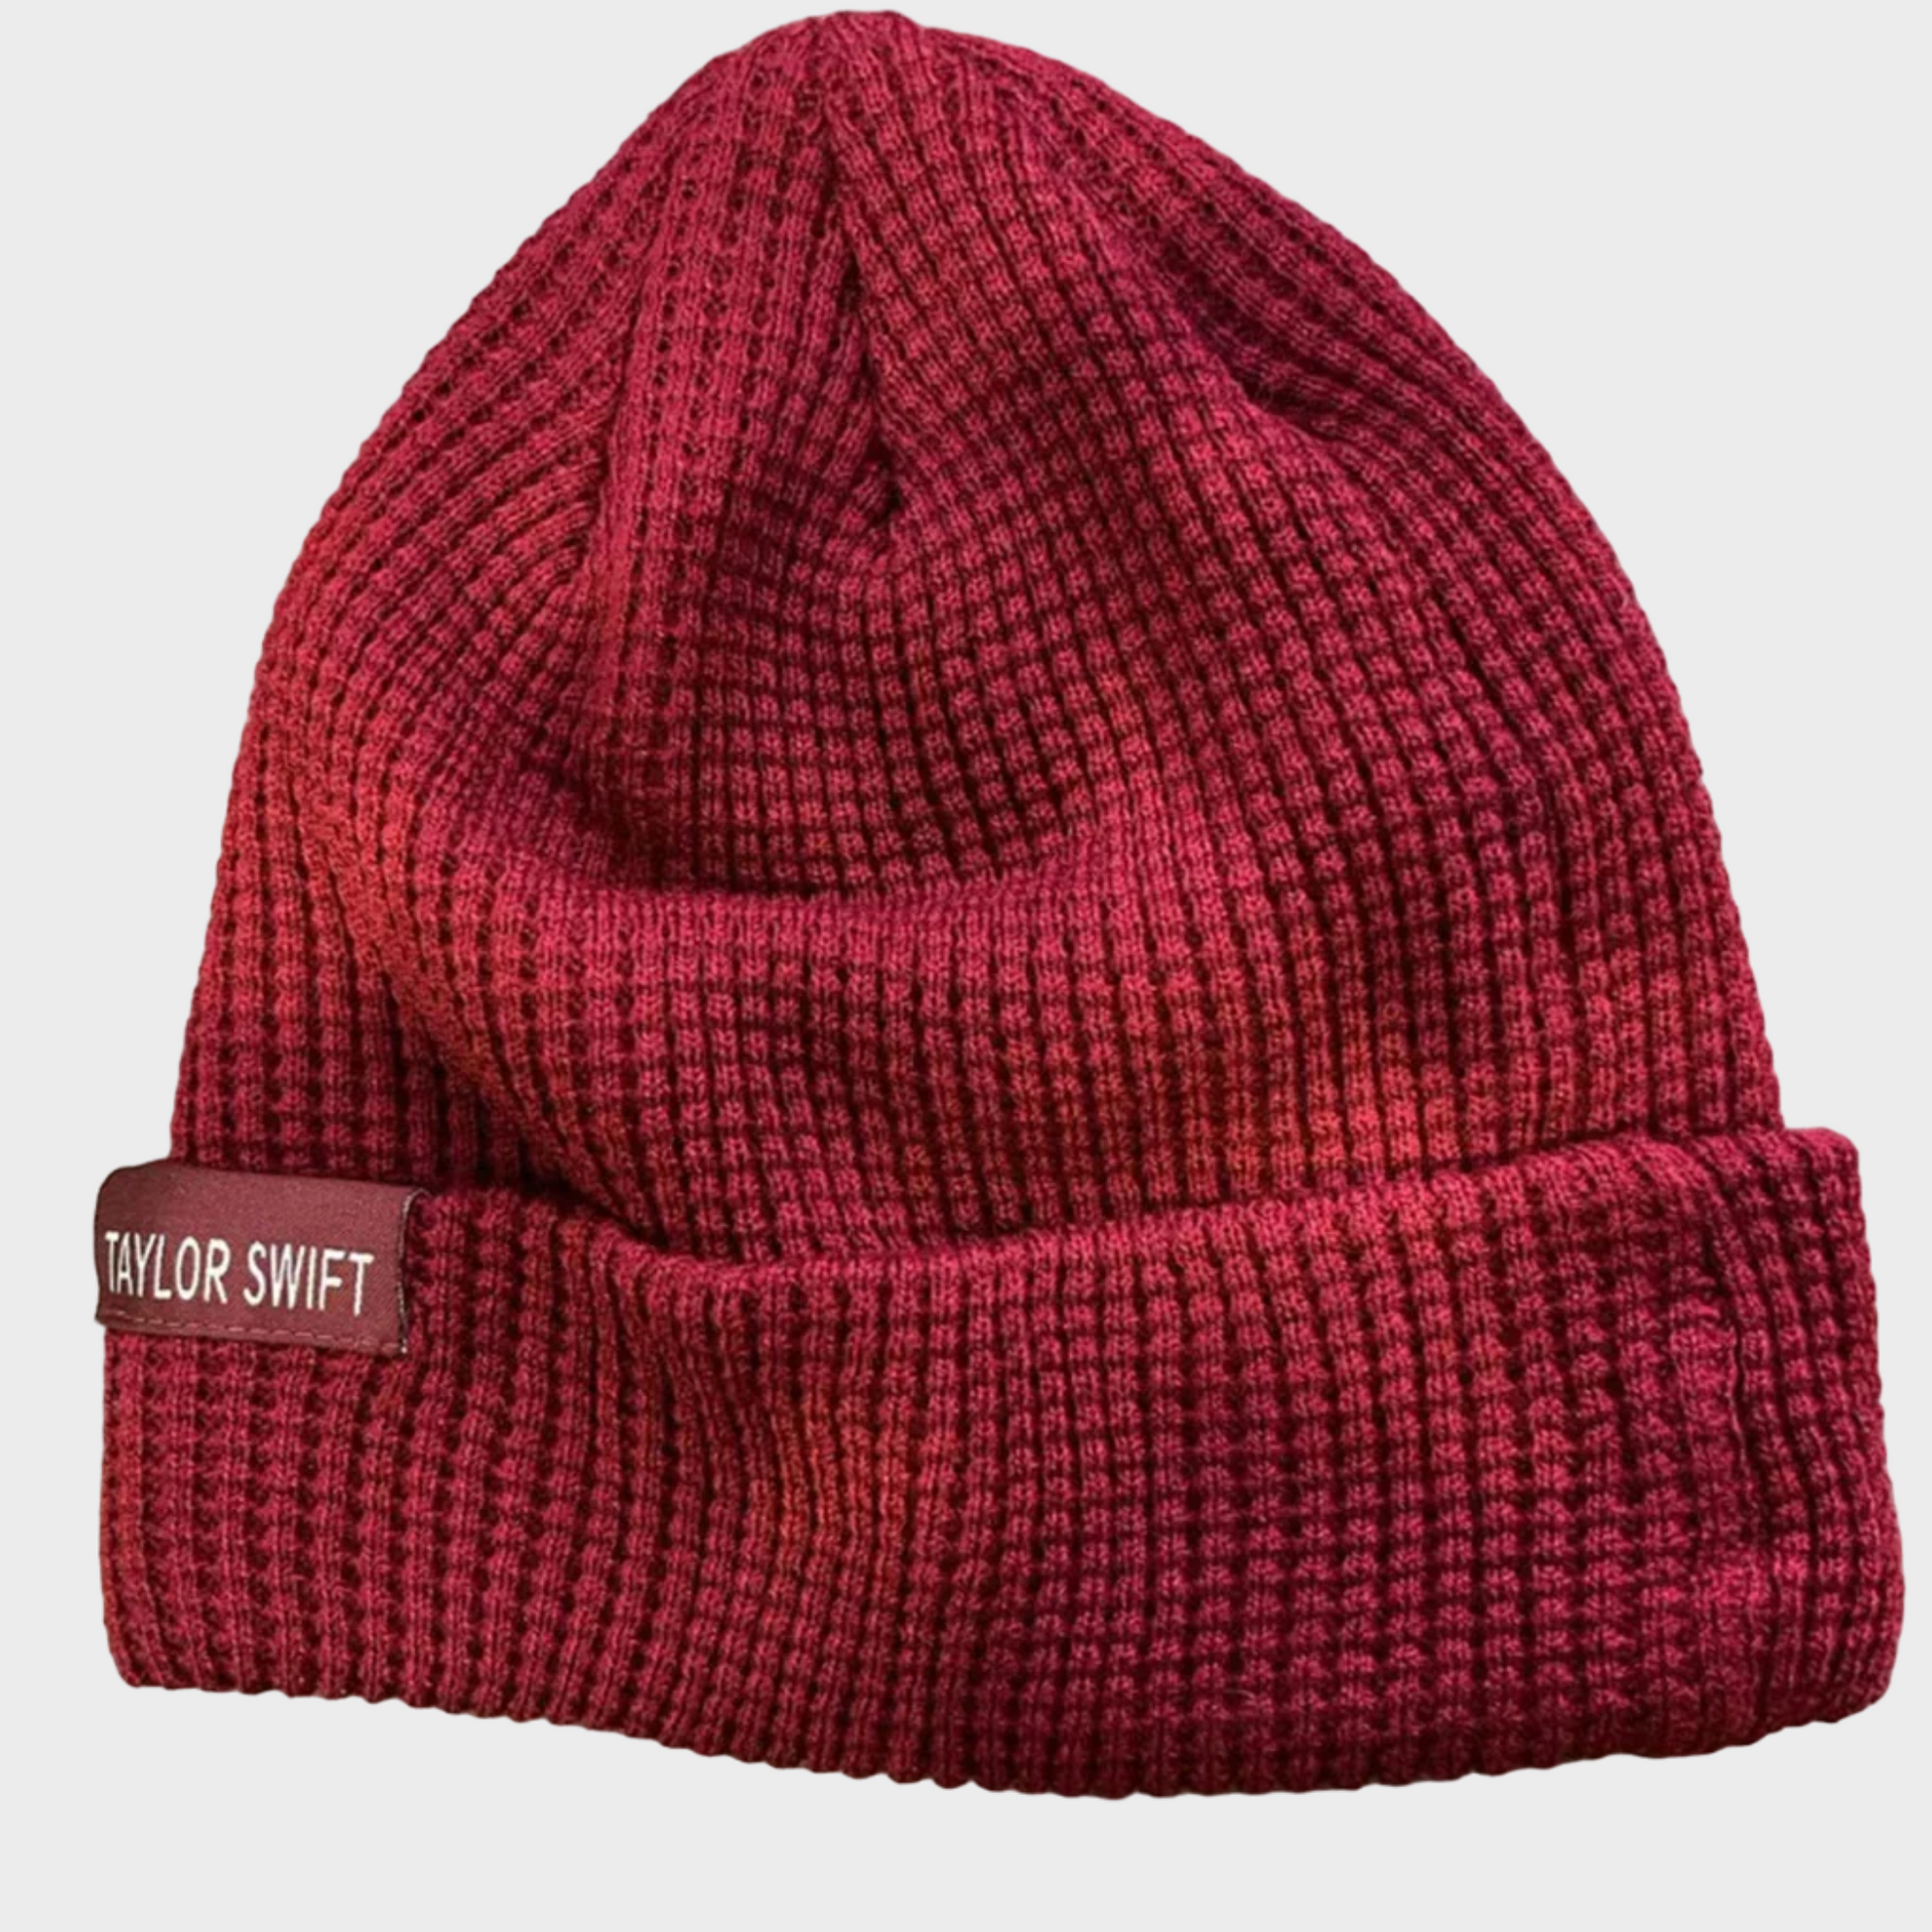 taylor swift all too well beanie